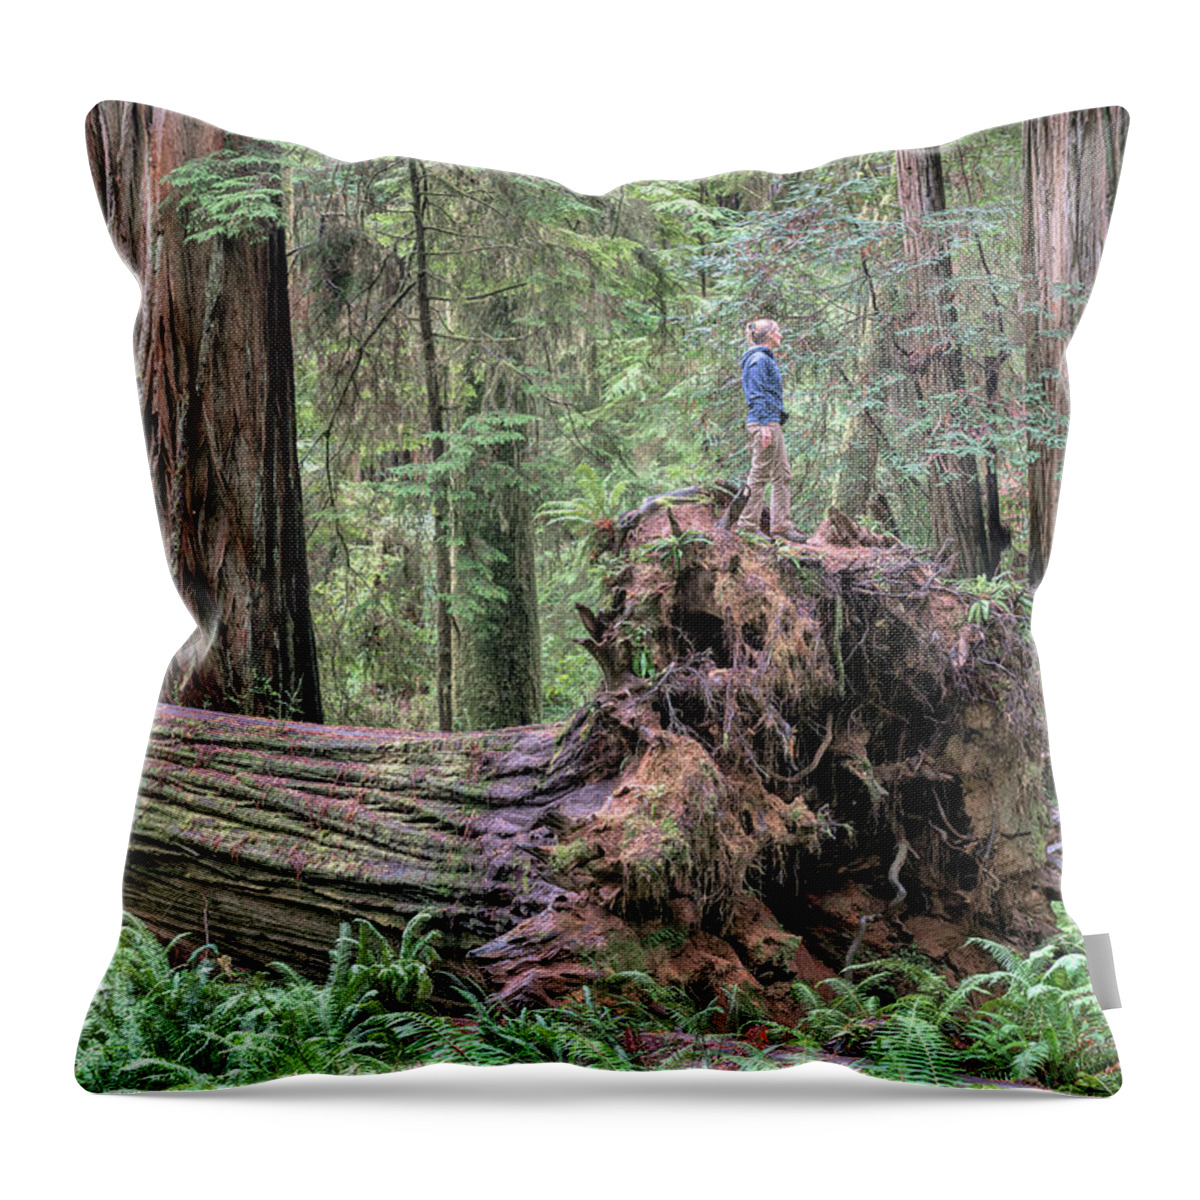 Boy Scout Trail Throw Pillow featuring the photograph Fallen Giant by Rudy Wilms